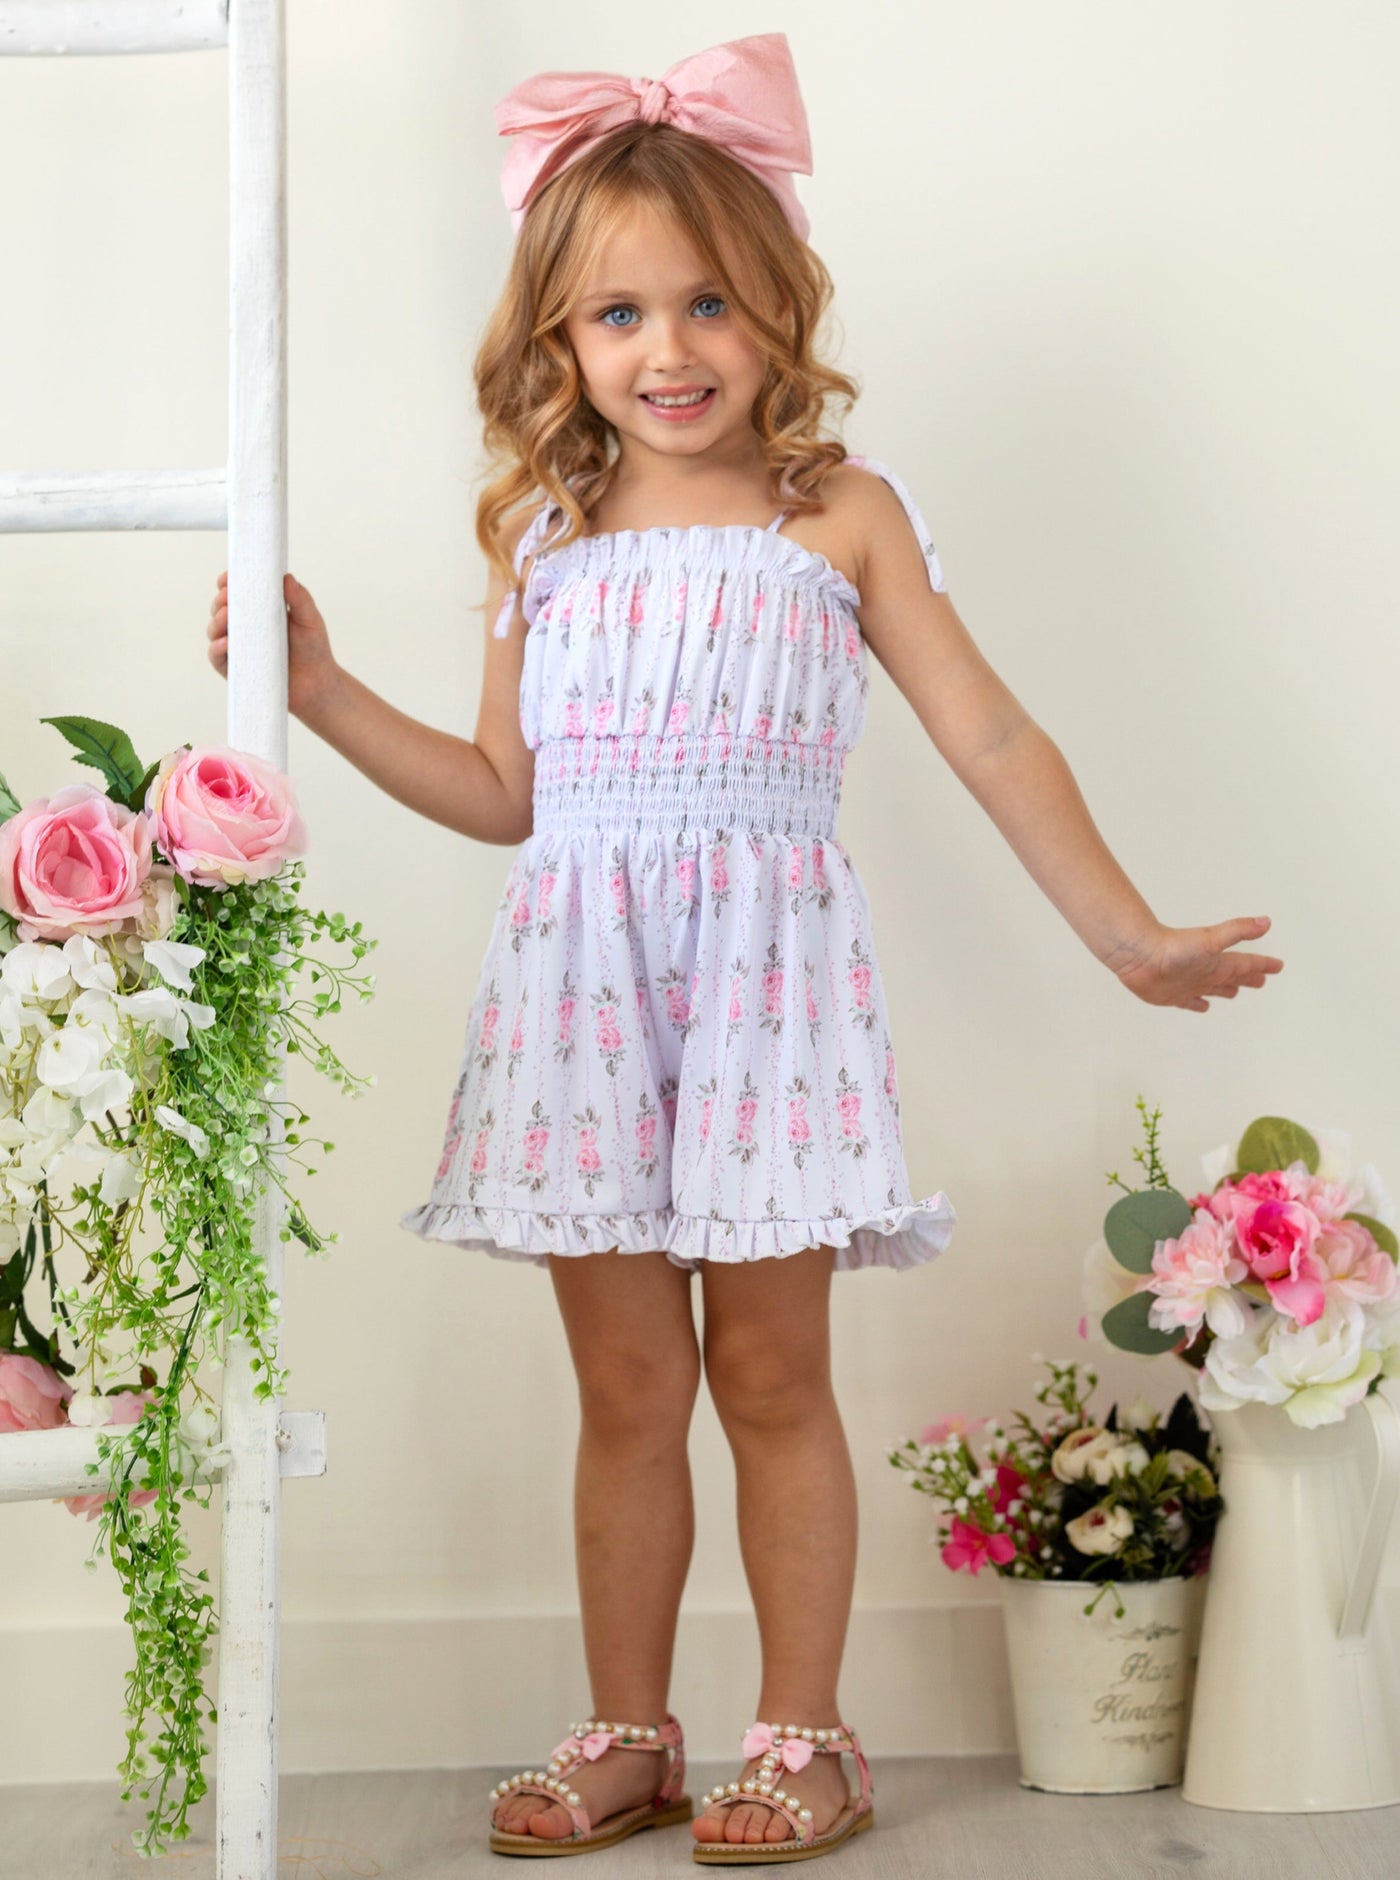 Mia Belle Girls Floral Romper | Girls Spring Outfits